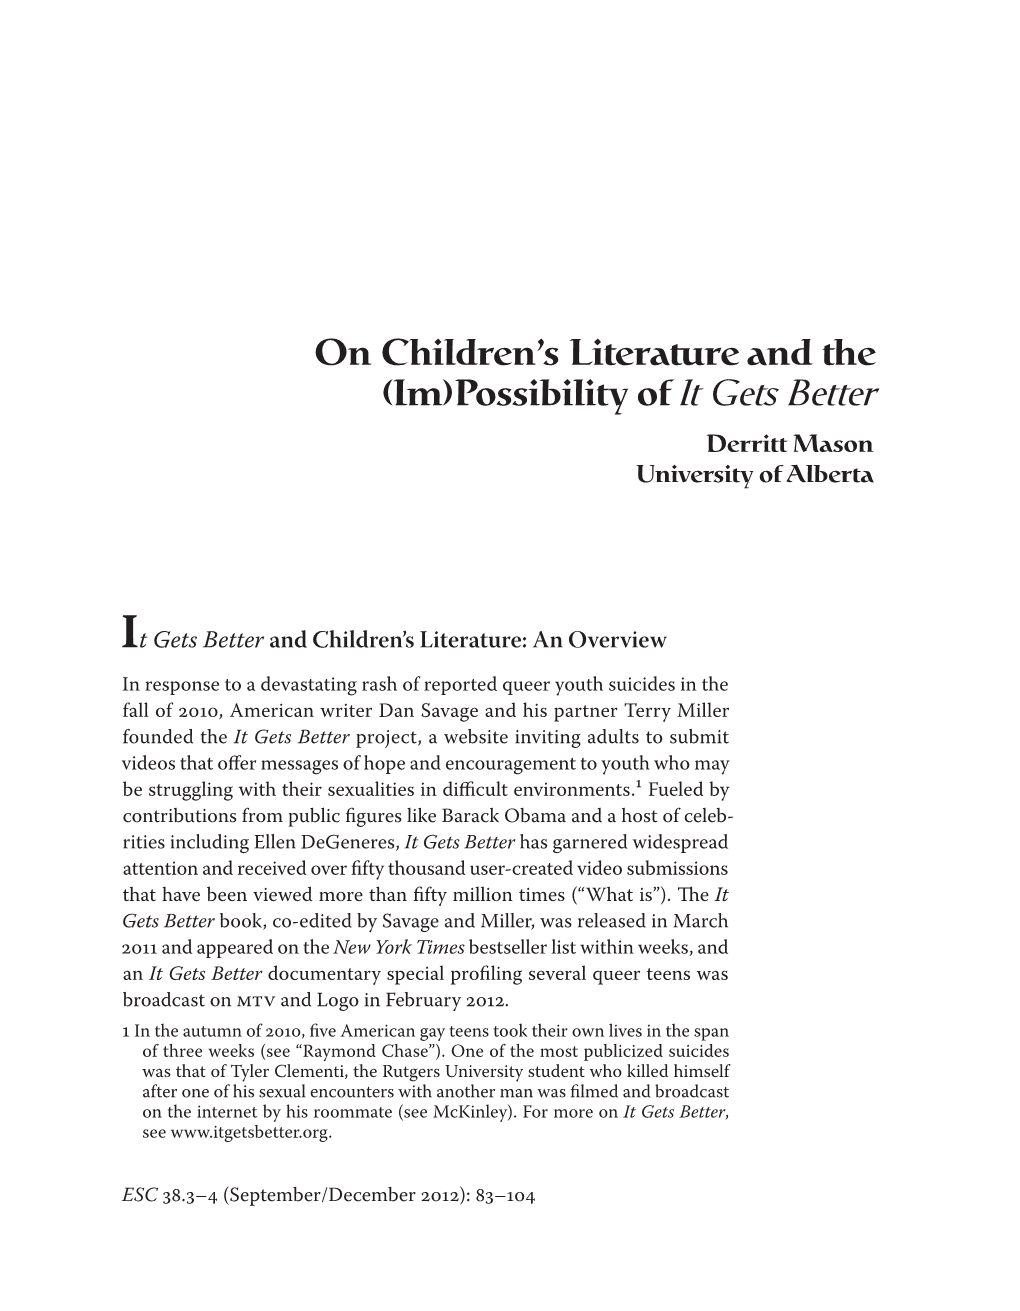 On Children's Literature and the (Im)Possibility of It Gets Better